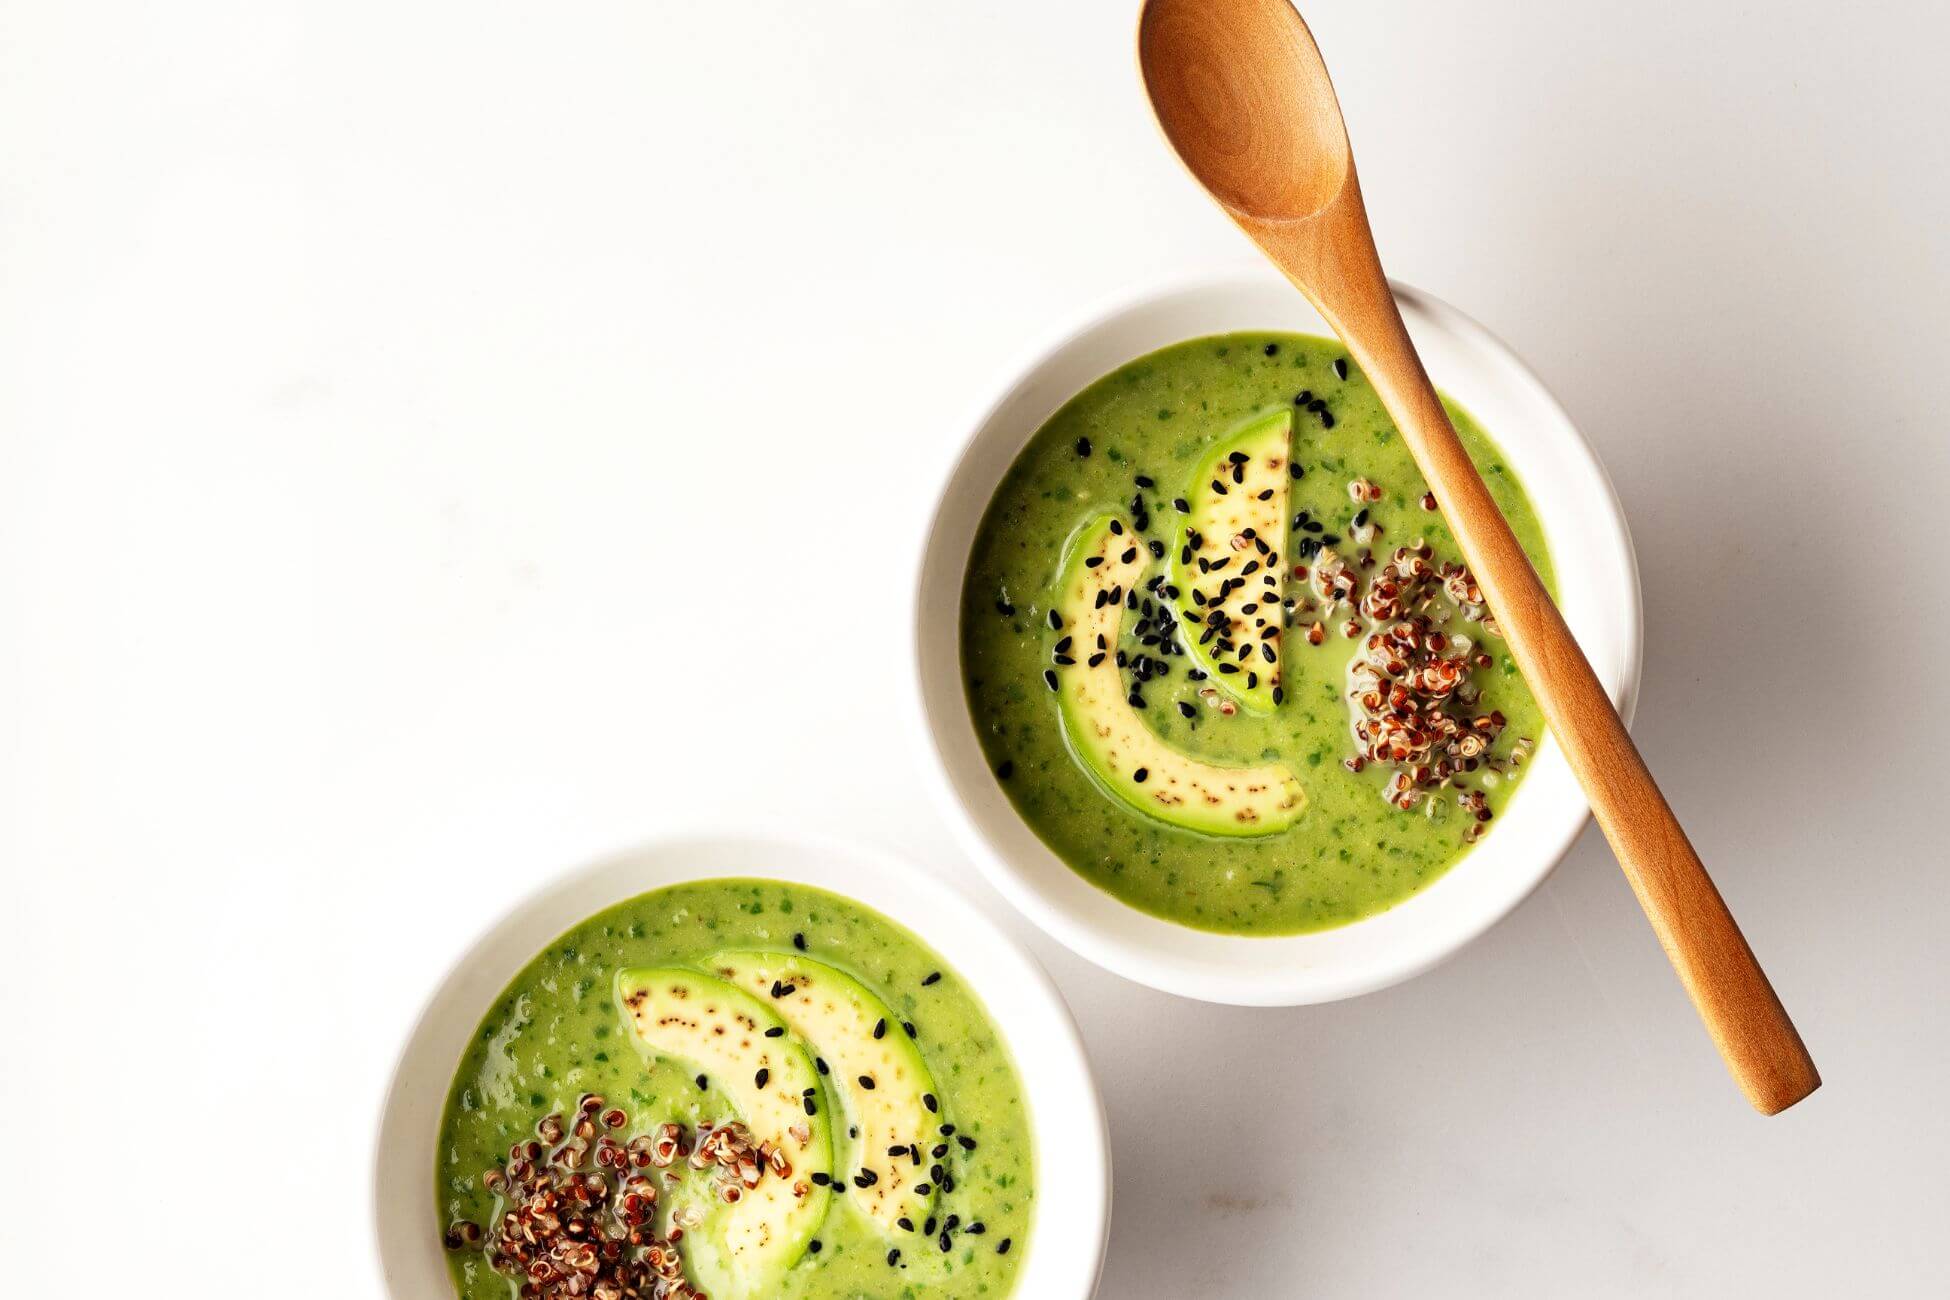 Two white bowls of green avocado soup garnished with avocado slices, quinoa, and black sesame seeds sit on a white surface. 